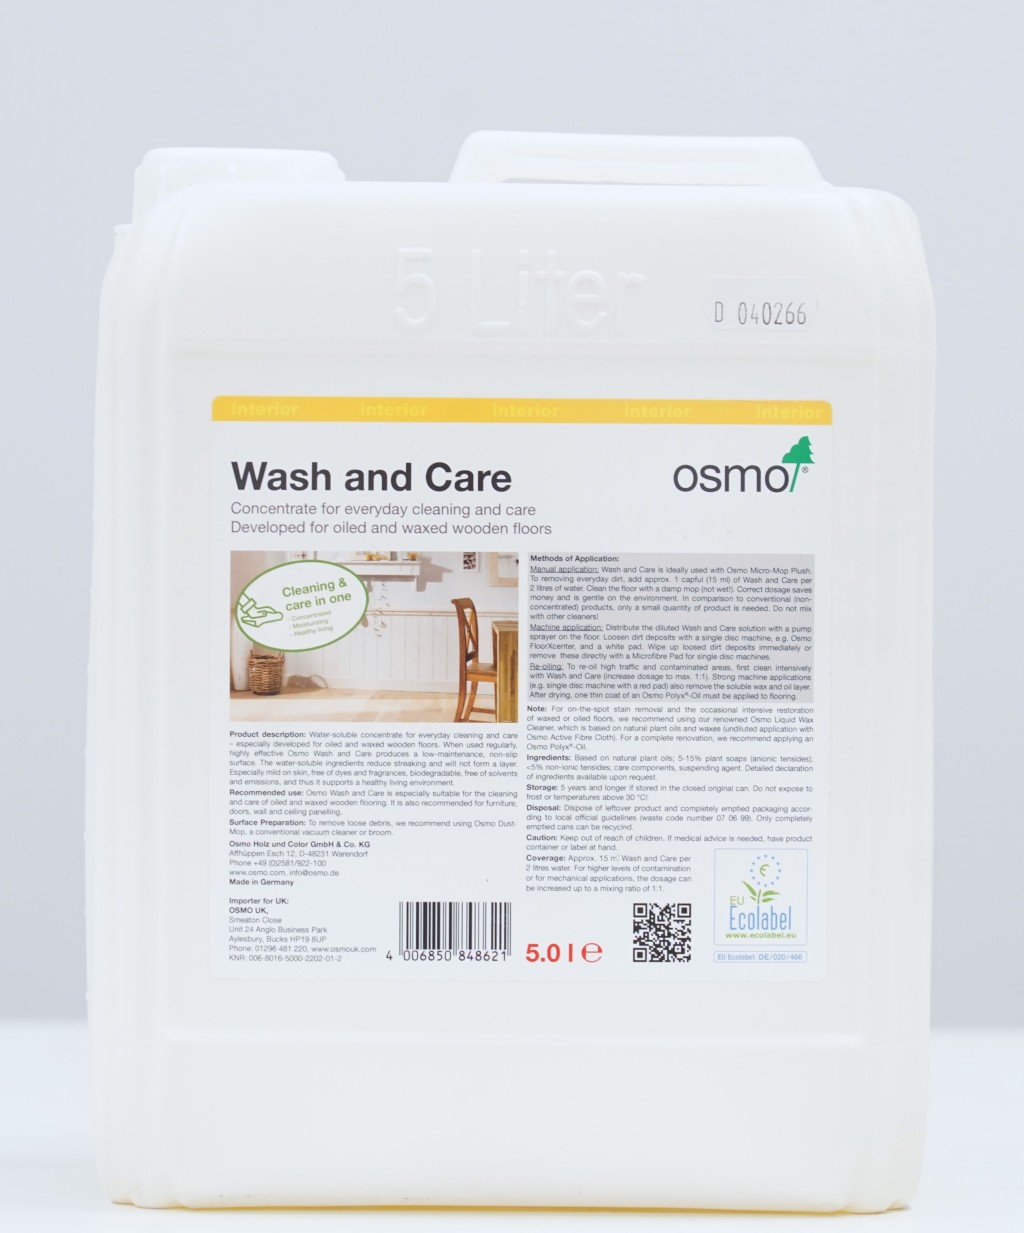 OSMO Wash and Care